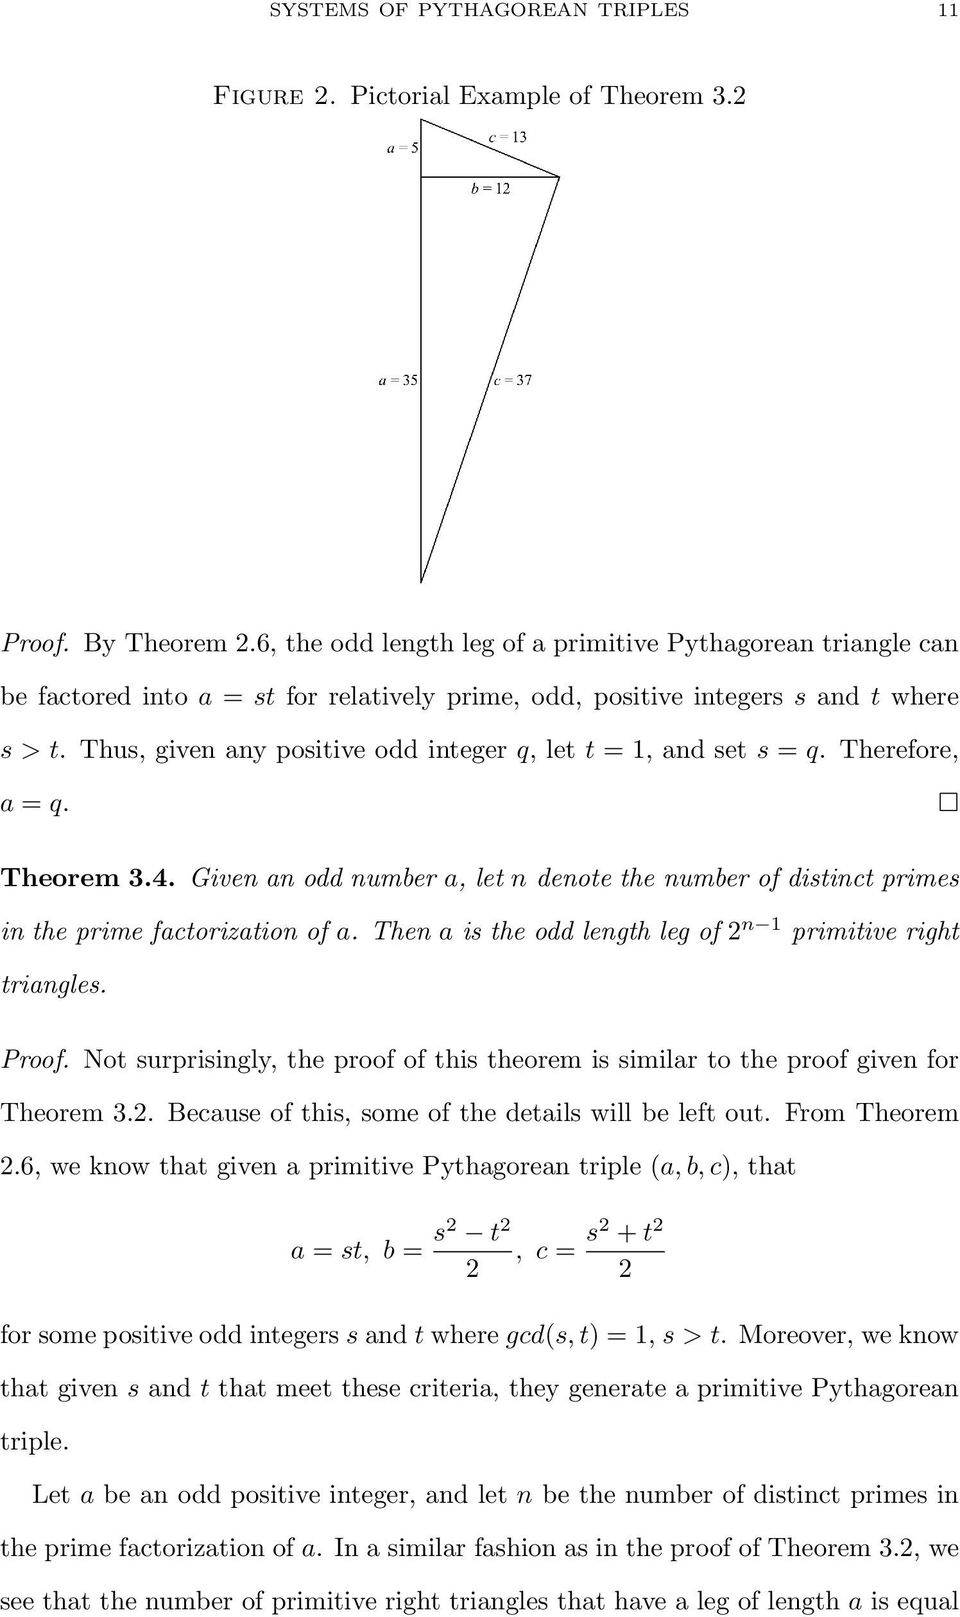 Thus, given any positive odd integer q, let t = 1, and set s = q. Therefore, a = q. Theorem 3.4. Given an odd number a, let n denote the number of distinct primes in the prime factorization of a.